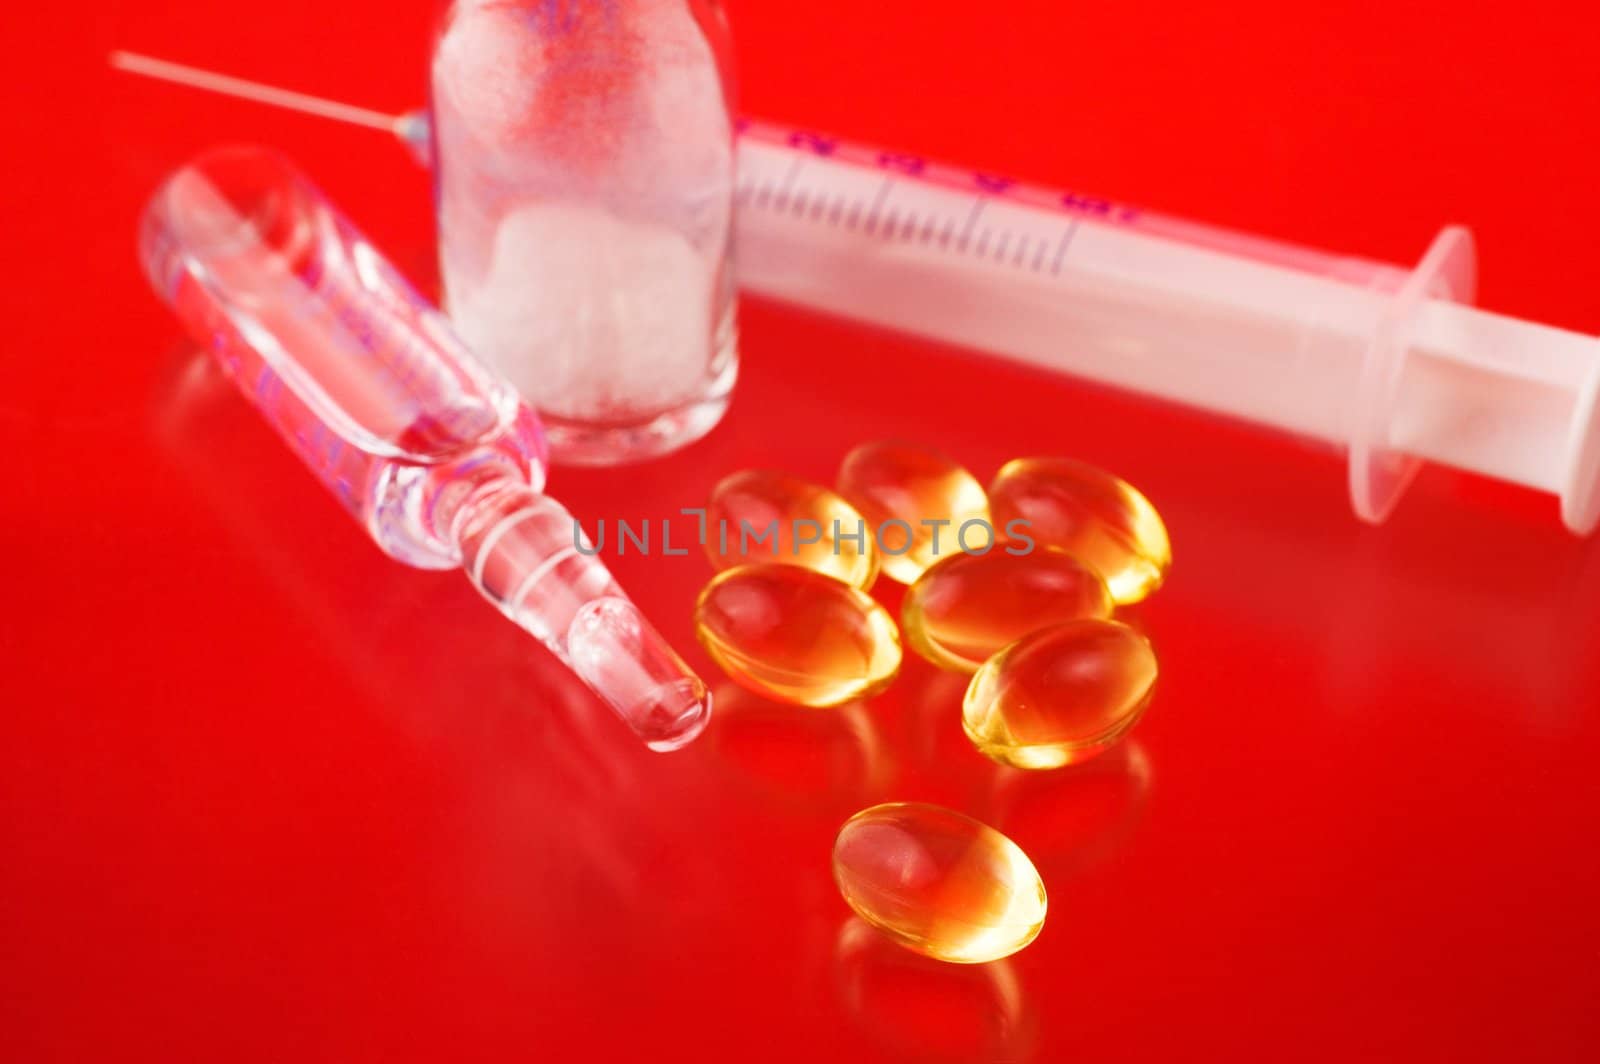 Syringe with pills and medicine bottles on red background